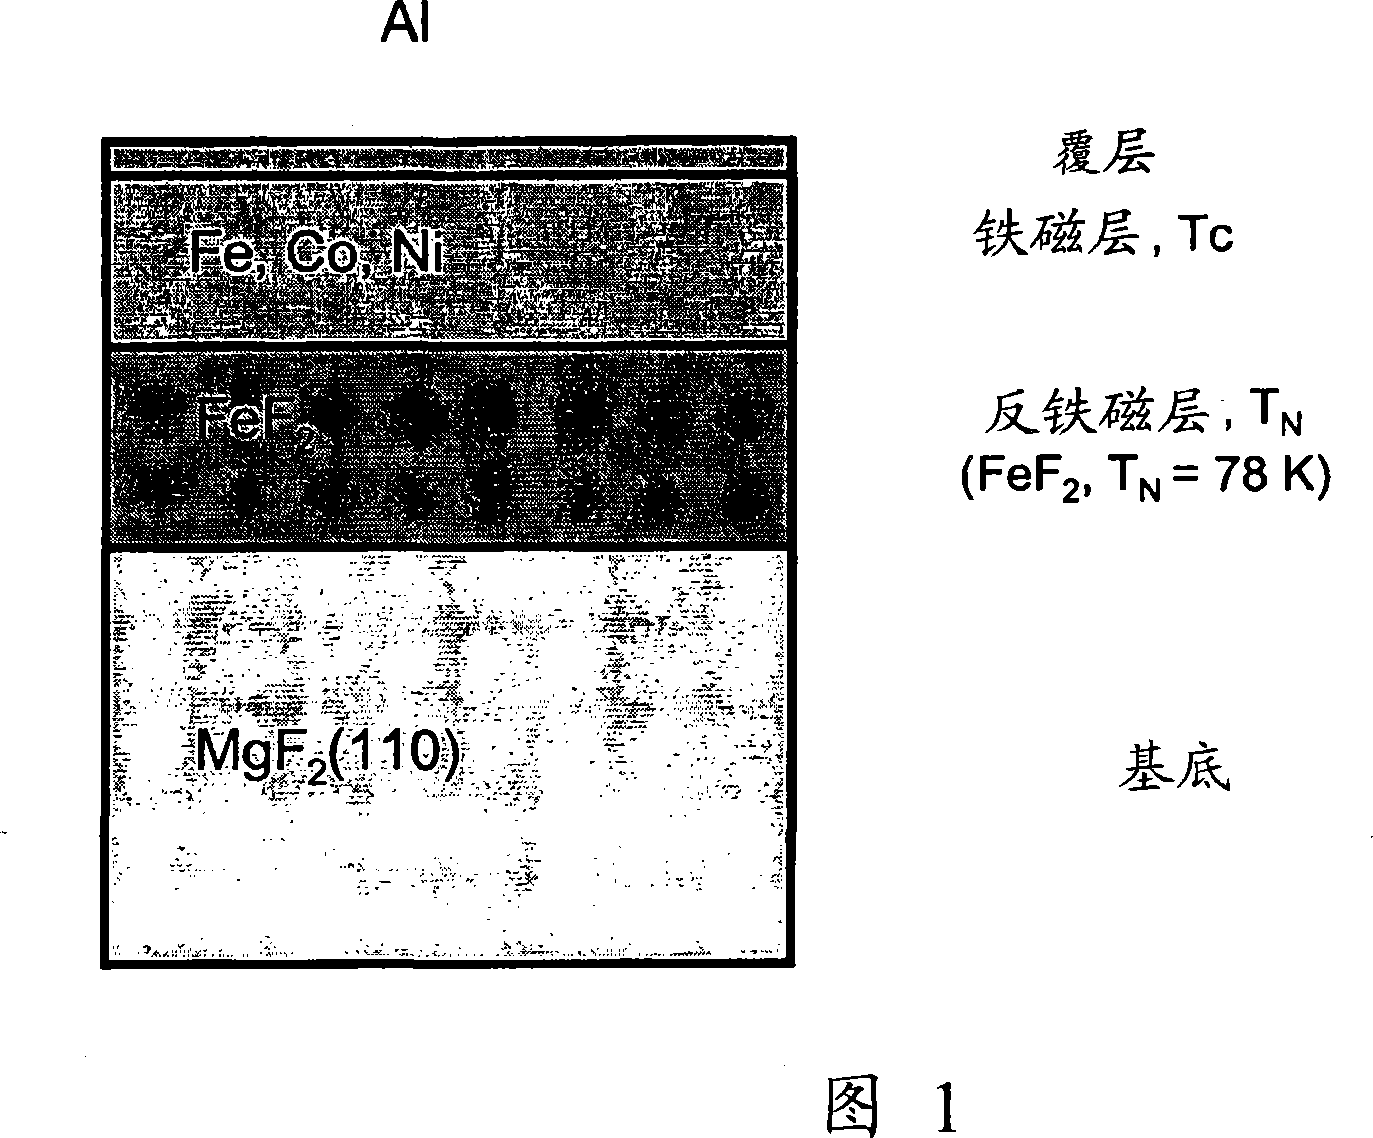 Exchange-bias based multi-state magnetic memory and logic devices and magnetically stabilized magnetic storage